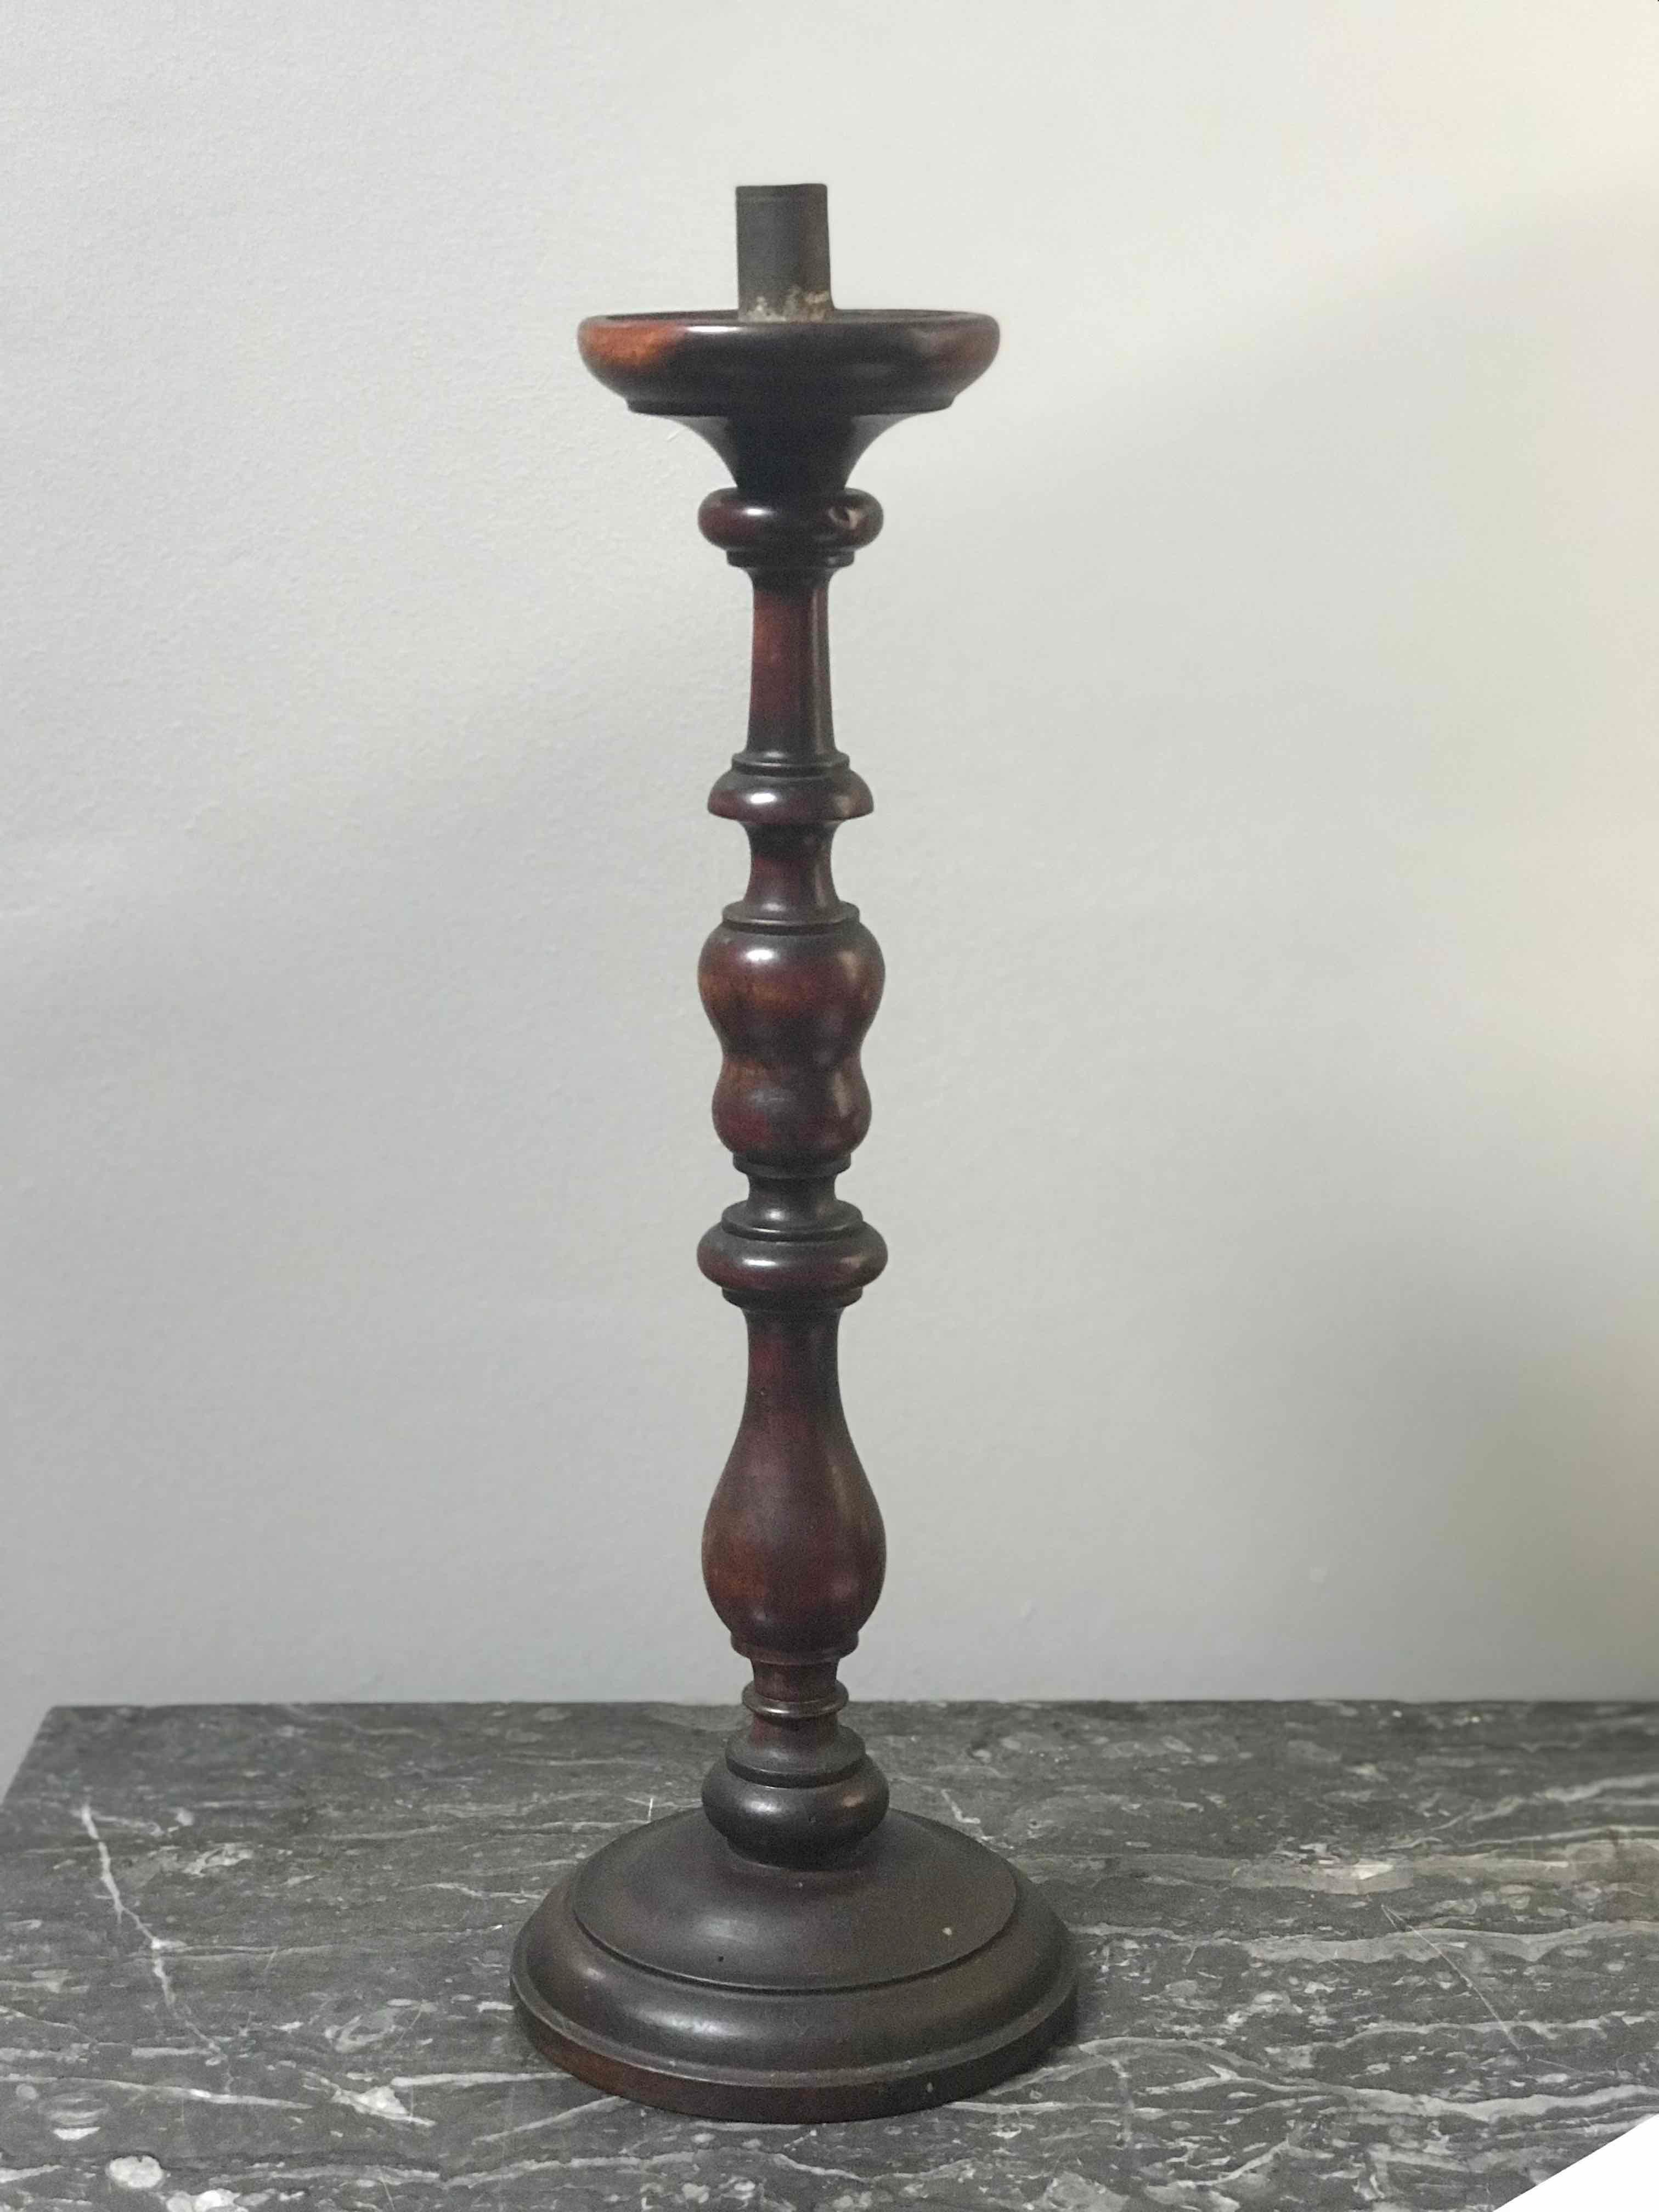 Walnut turned candlestick from 1860s France. 